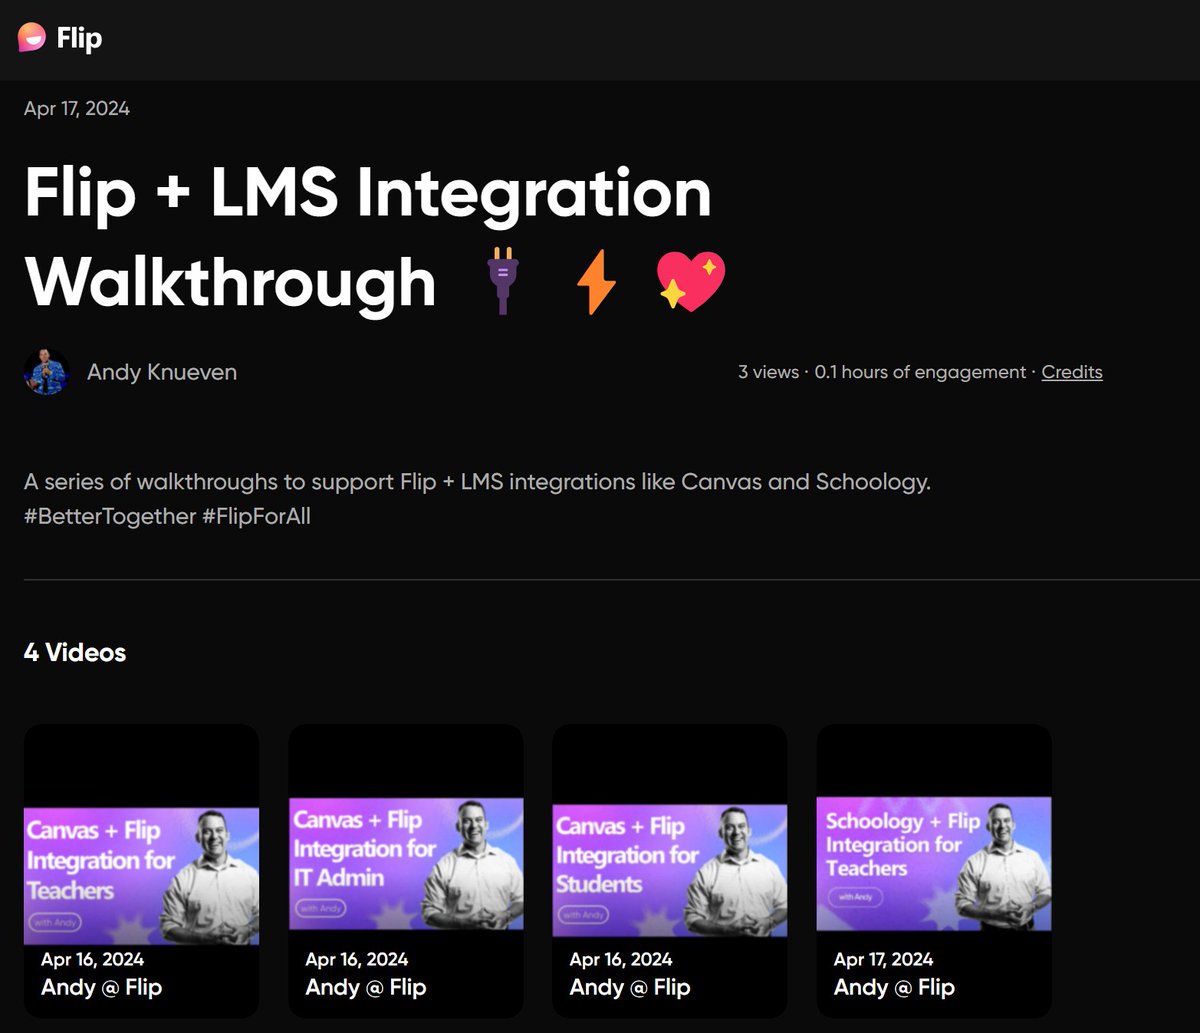 If you are a @Canvas_by_Inst or #Schoology @MyPowerSchool educator, this Flip #Mixtape📼 from @MrCoachK15 is for you!

🔌⚡ flip.com/mixtapes/+c76b8 

💖 #FlipForAll #BetterTogether #CanvasLMS